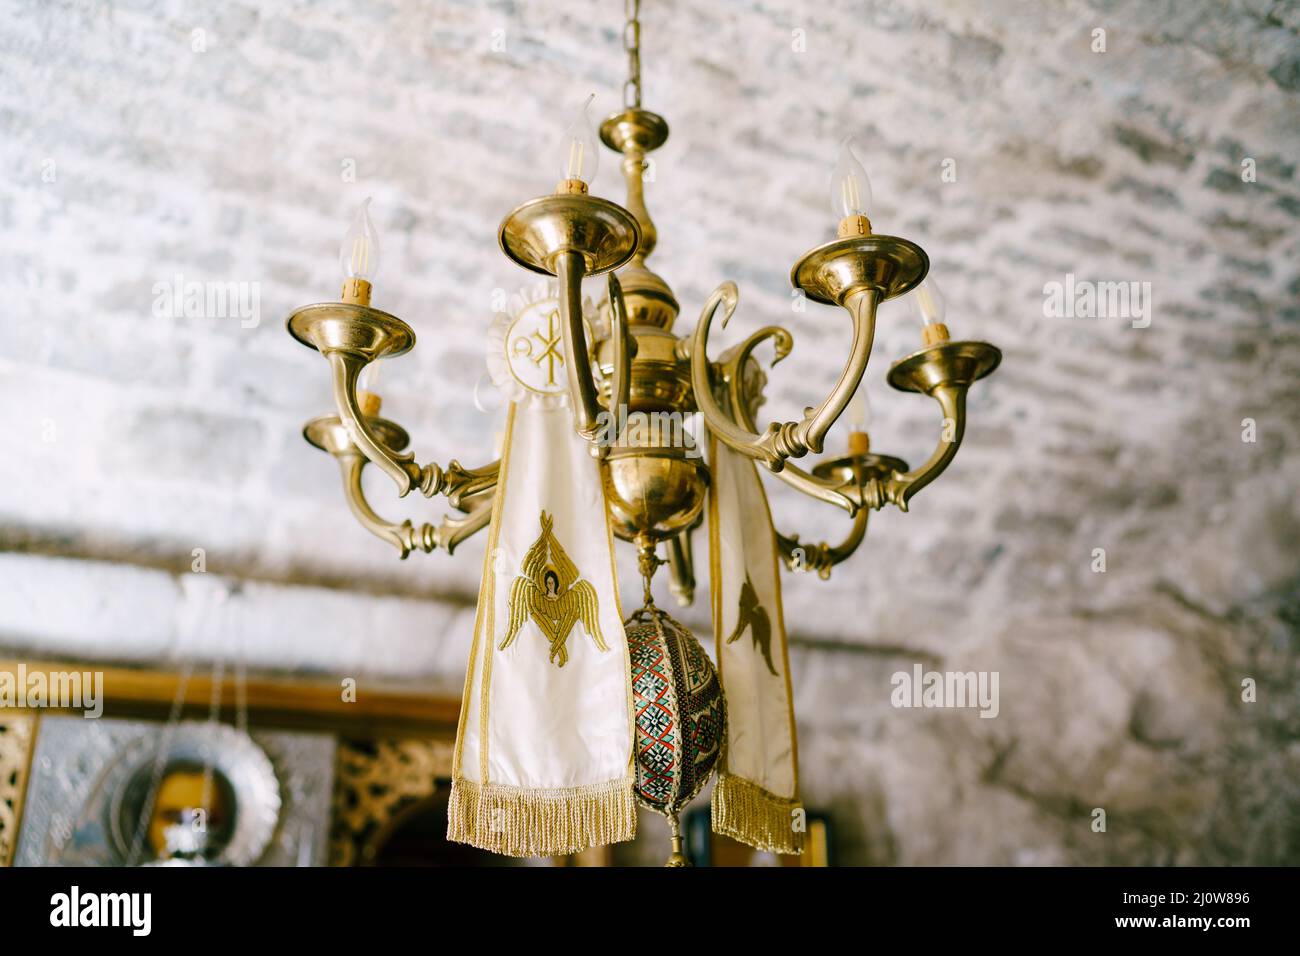 Simple chandelier on a chain in a church under a stone ceiling Stock Photo